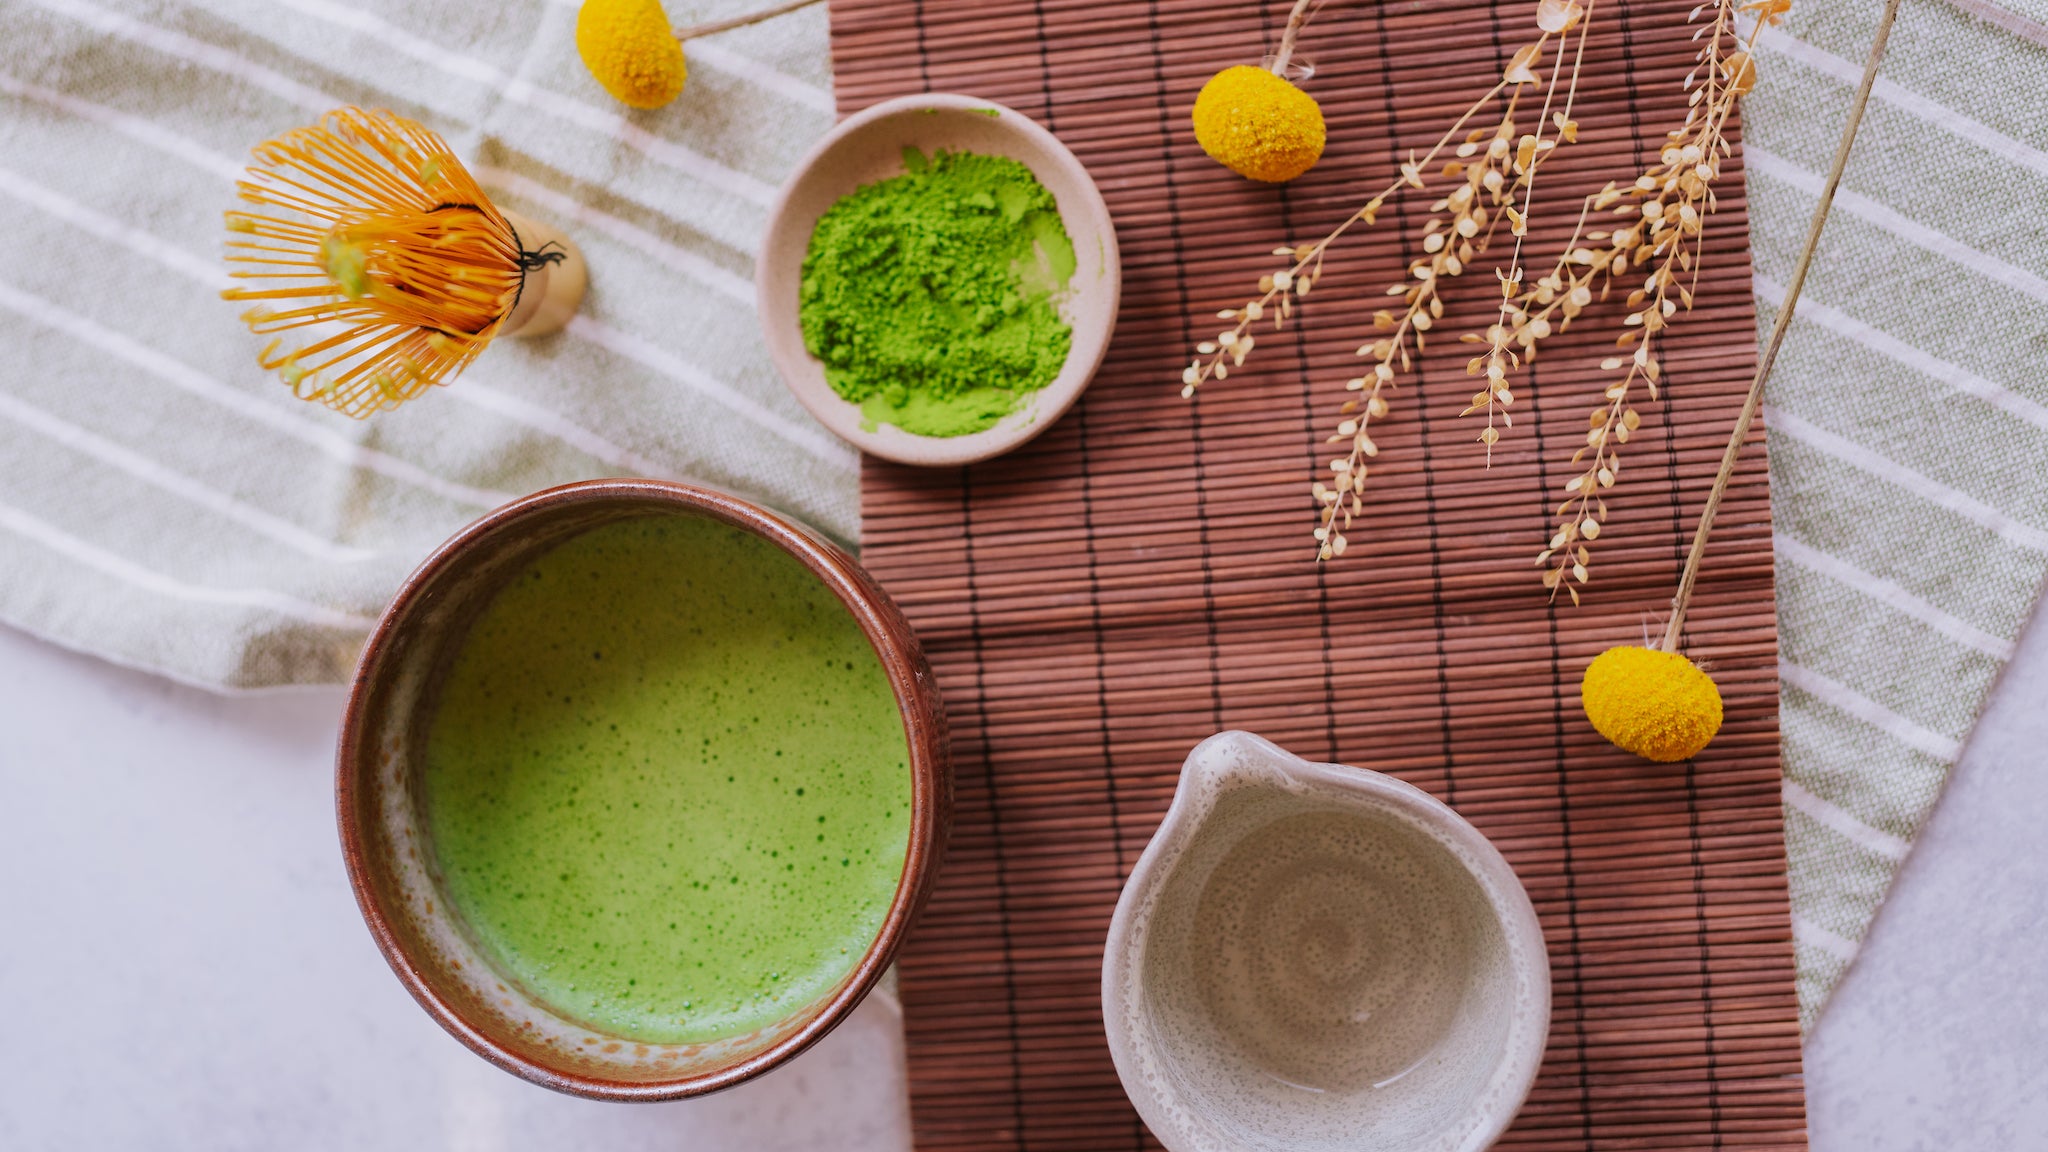 Bowl of matcha, matcha whisk (chasen), matcha powder, and small pitcher of water on a bamboo background